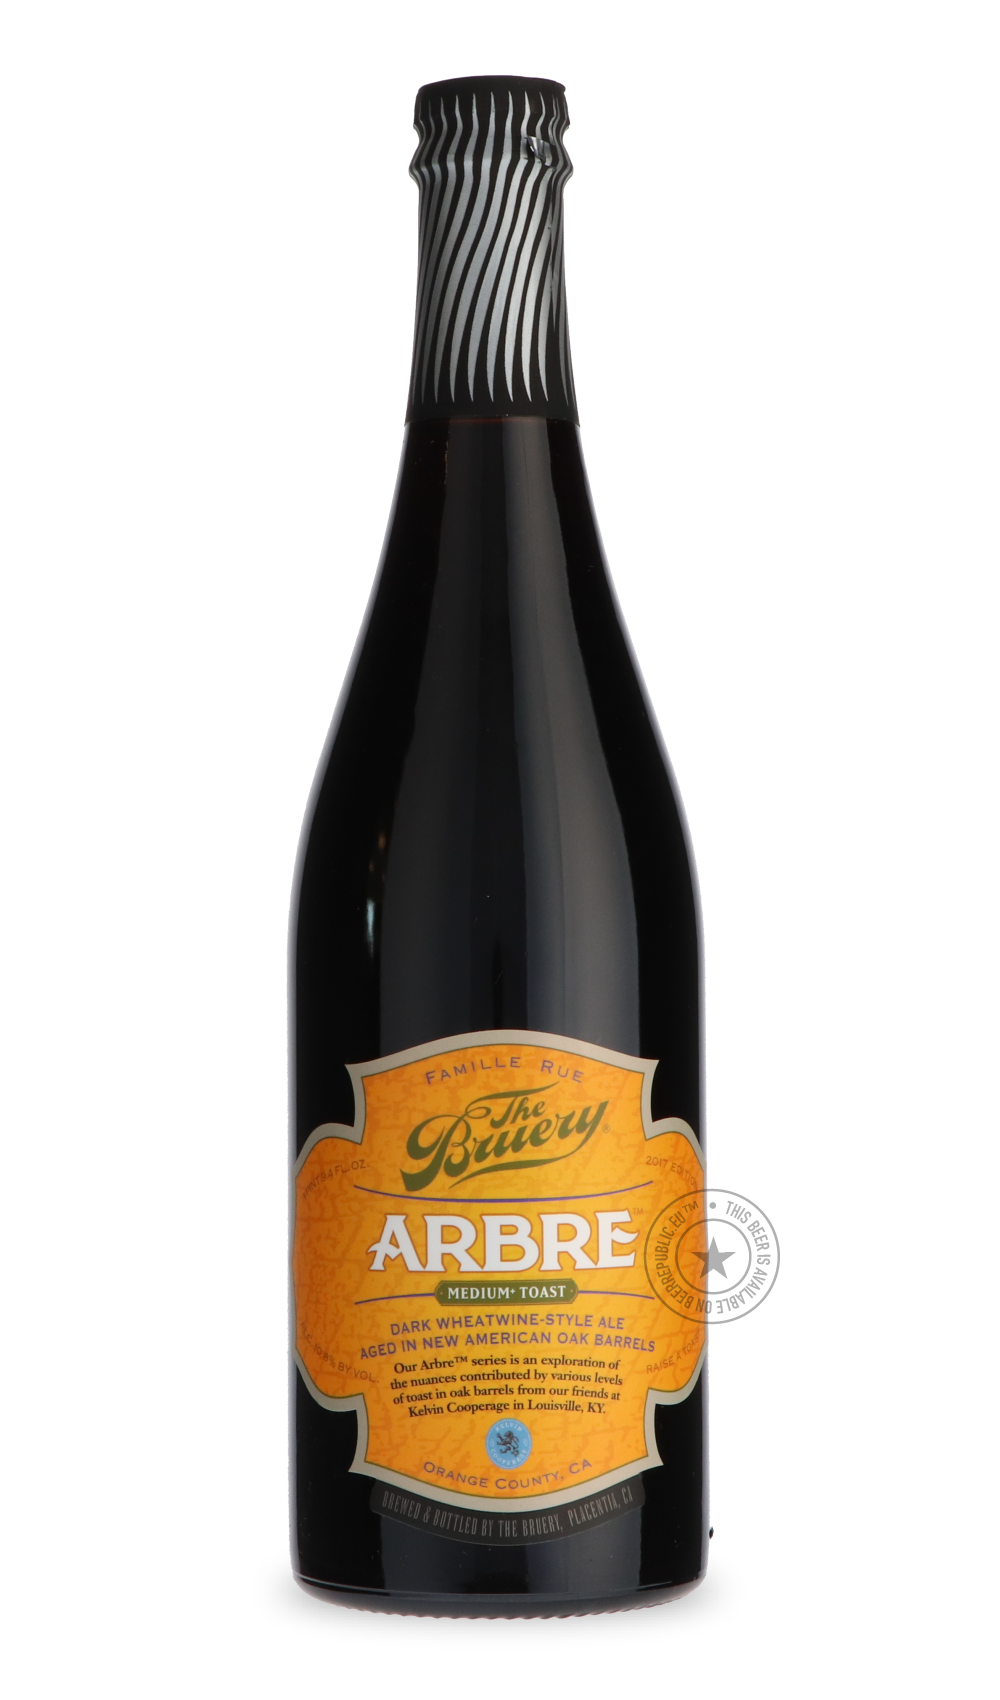 -The Bruery- Arbre Medium Toast-Brown & Dark- Only @ Beer Republic - The best online beer store for American & Canadian craft beer - Buy beer online from the USA and Canada - Bier online kopen - Amerikaans bier kopen - Craft beer store - Craft beer kopen - Amerikanisch bier kaufen - Bier online kaufen - Acheter biere online - IPA - Stout - Porter - New England IPA - Hazy IPA - Imperial Stout - Barrel Aged - Barrel Aged Imperial Stout - Brown - Dark beer - Blond - Blonde - Pilsner - Lager - Wheat - Weizen - 